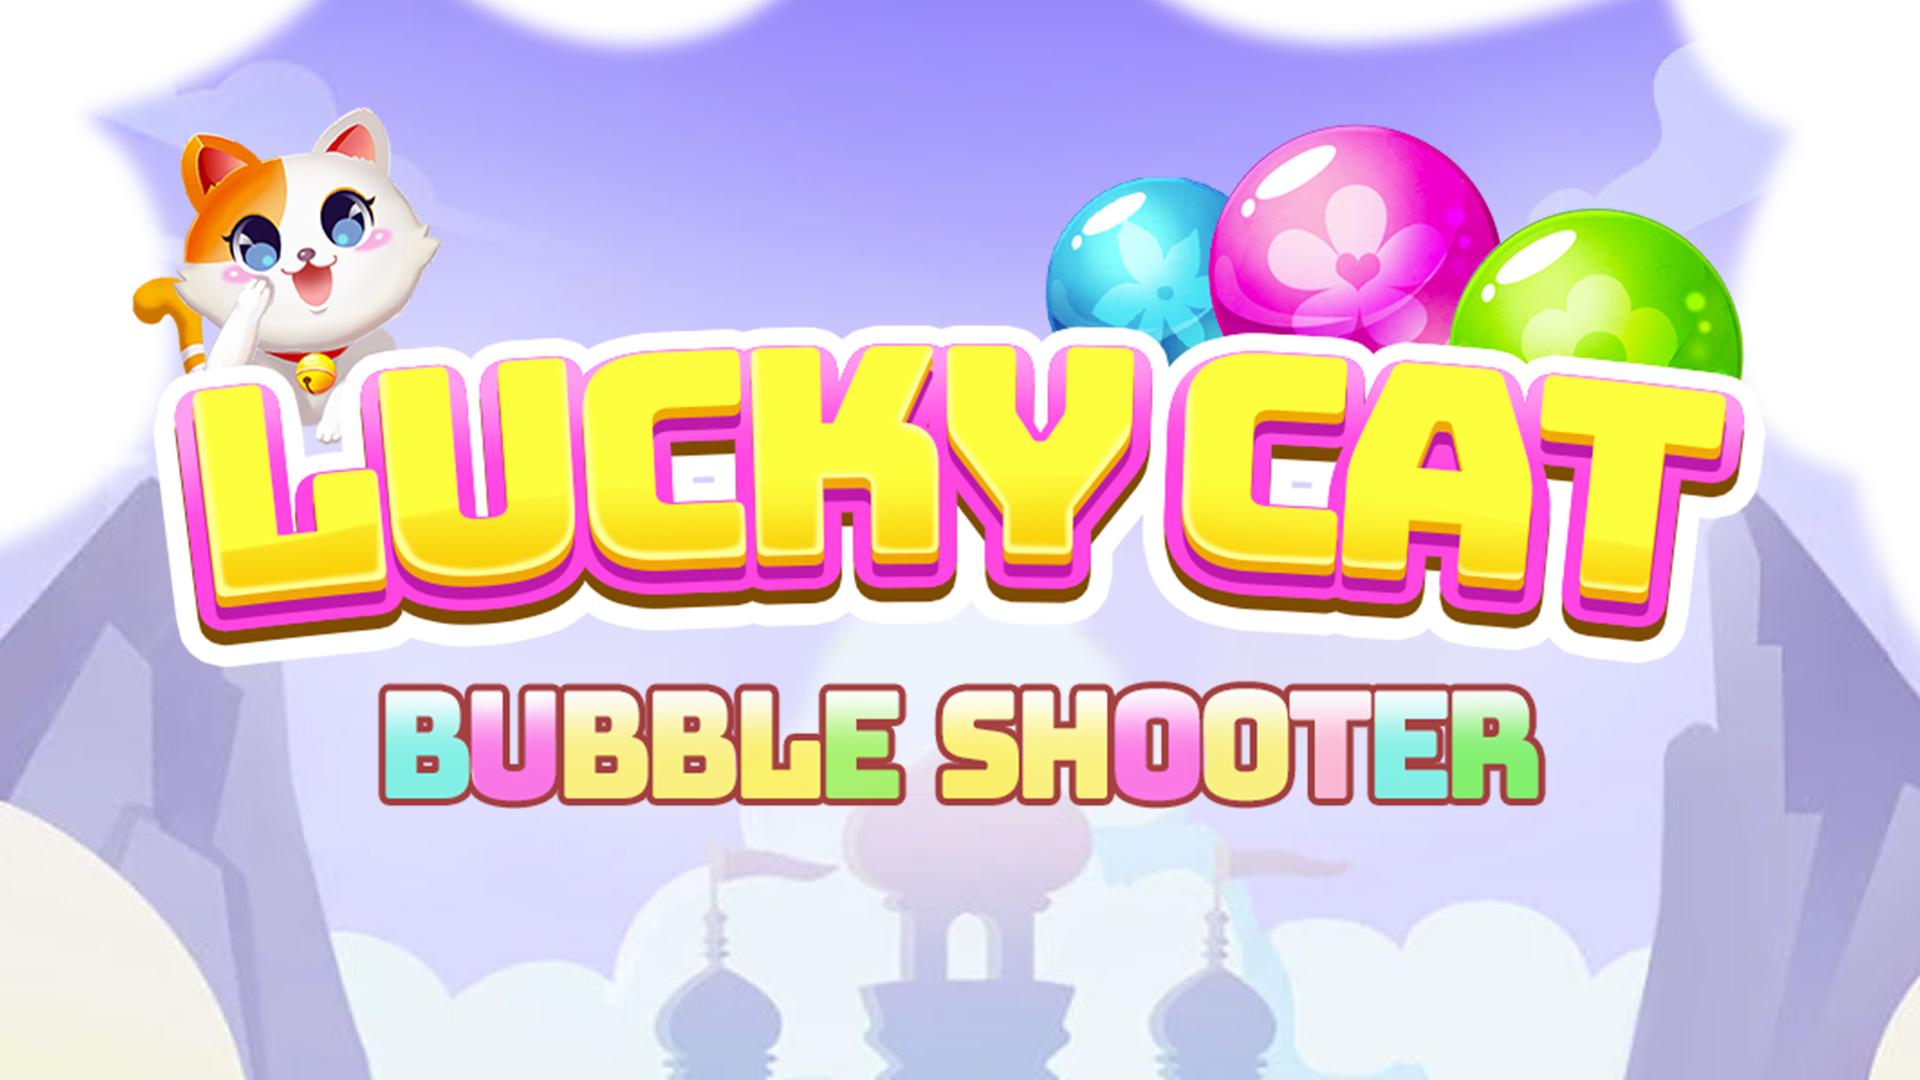 Bubble Shooter FX for Nintendo Switch - Nintendo Official Site